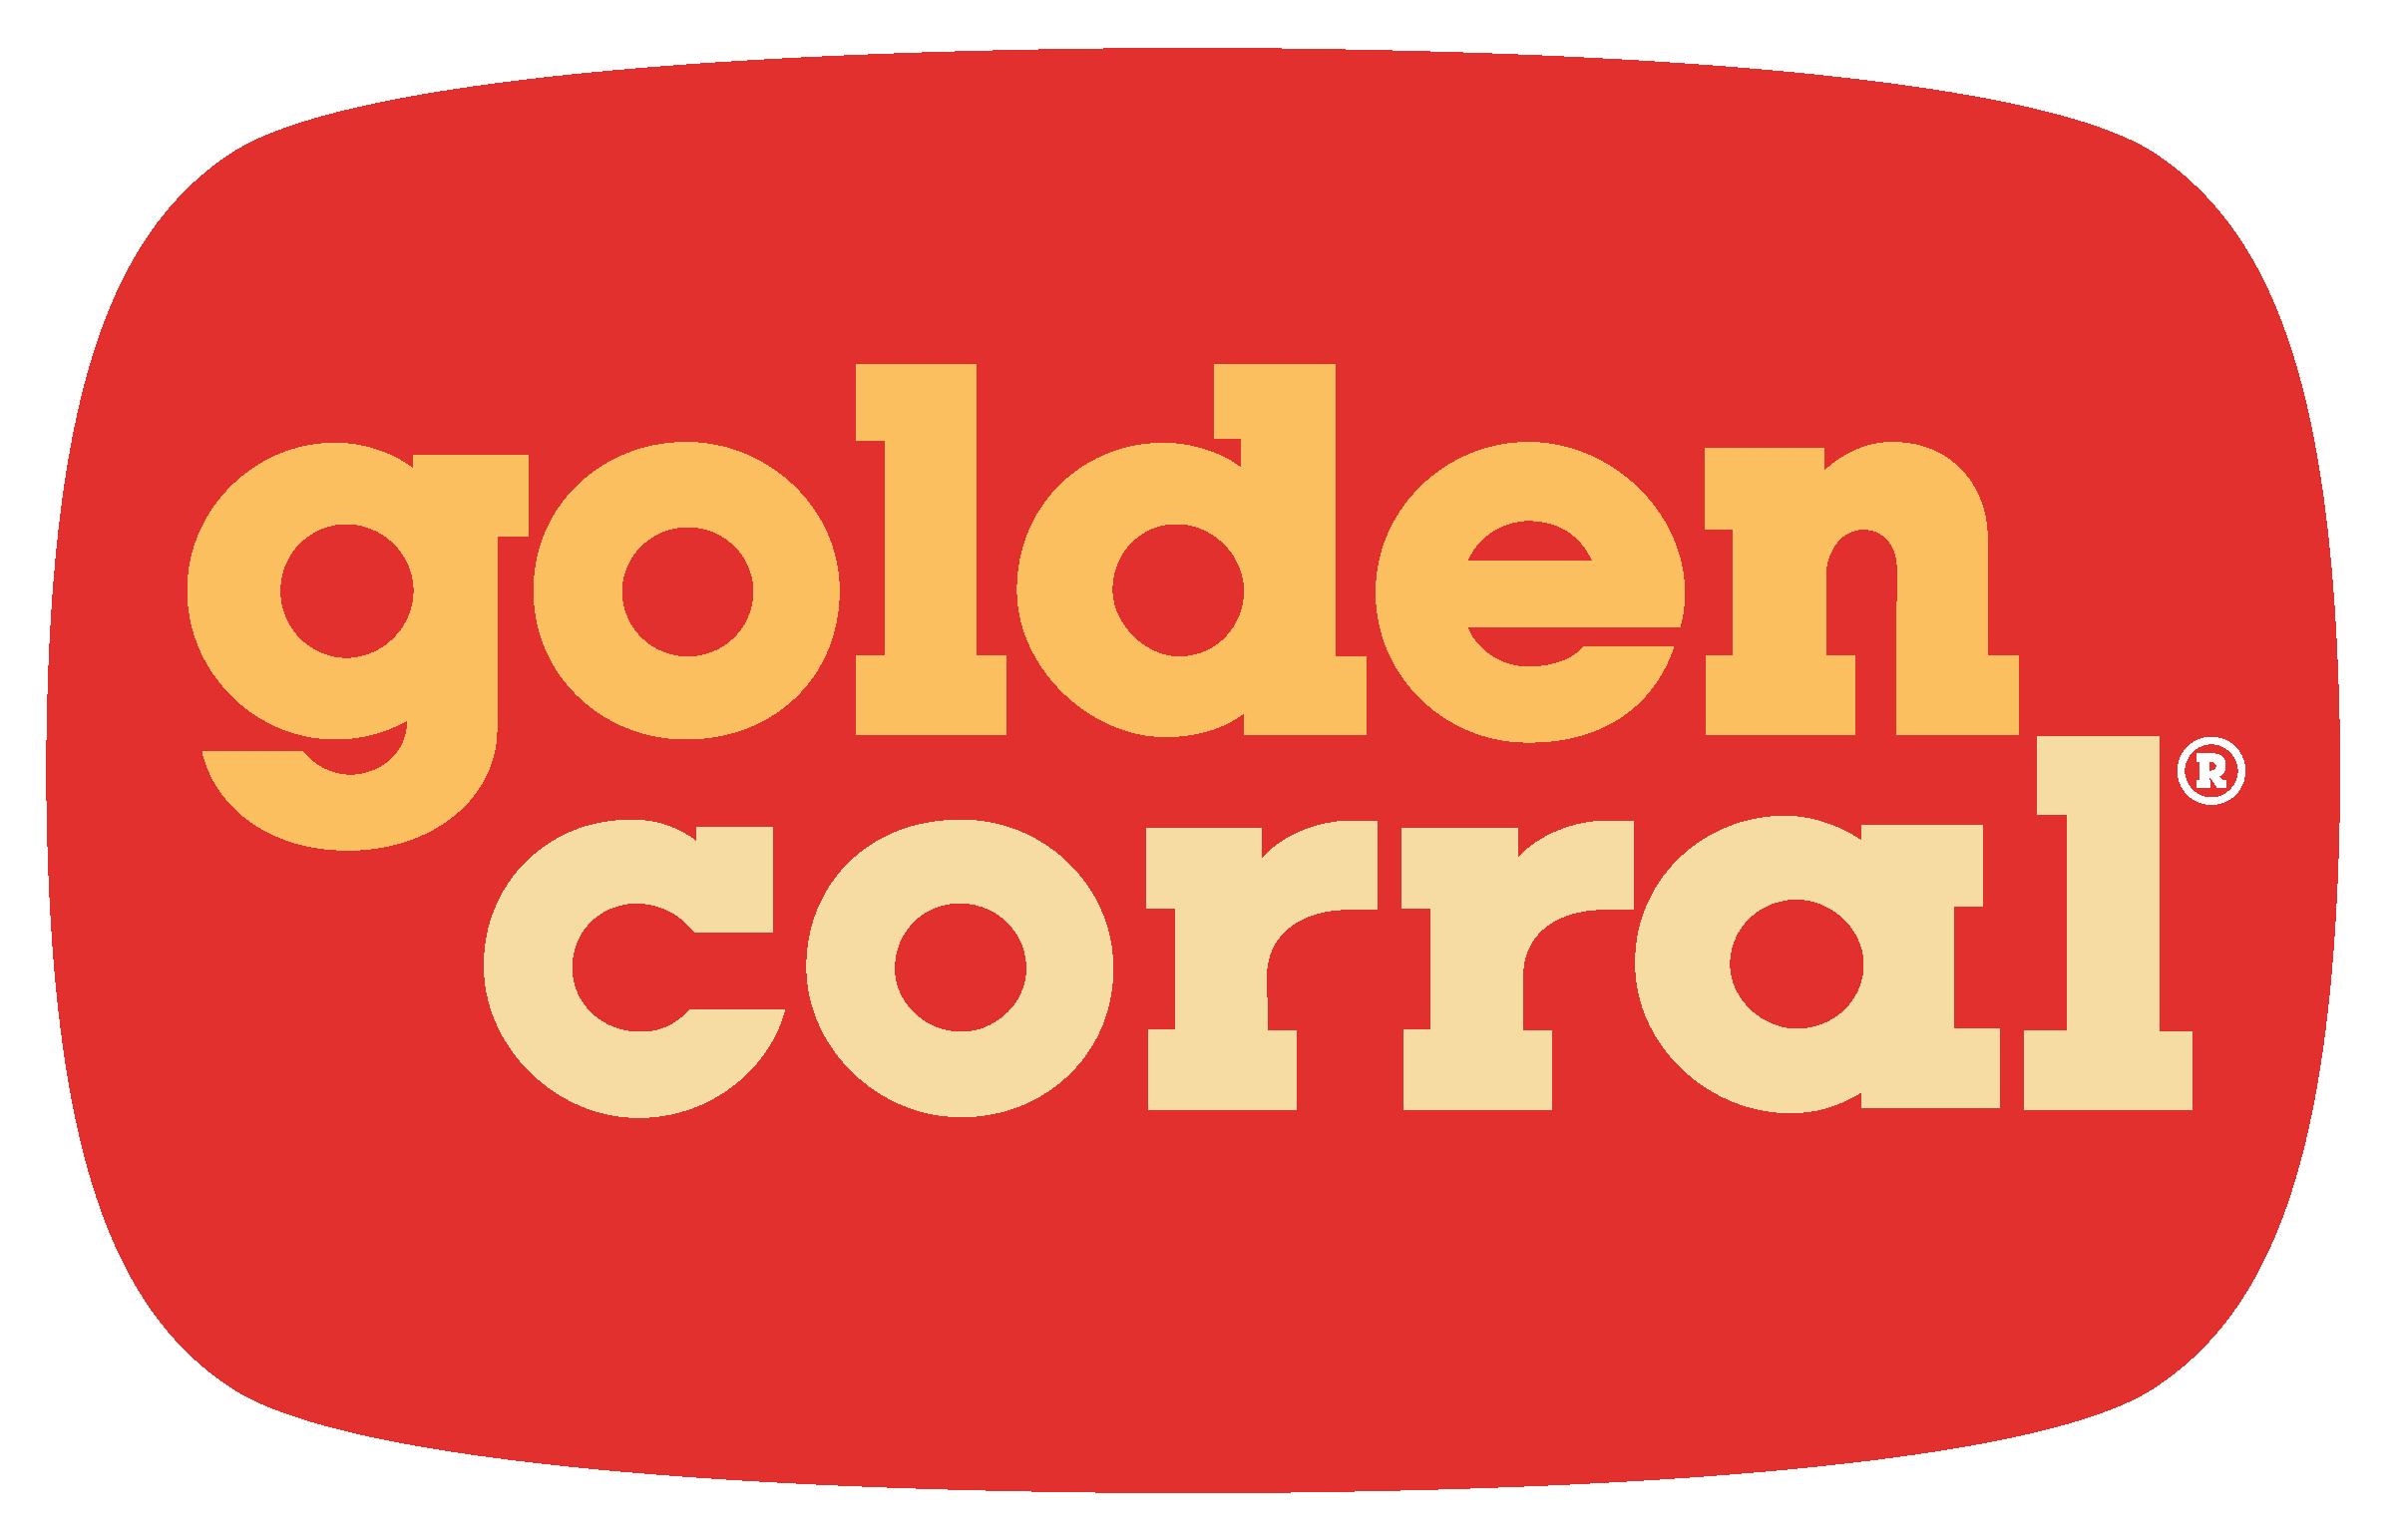 Bffet Logo - Golden Corral - America's #1 Buffet and Grill